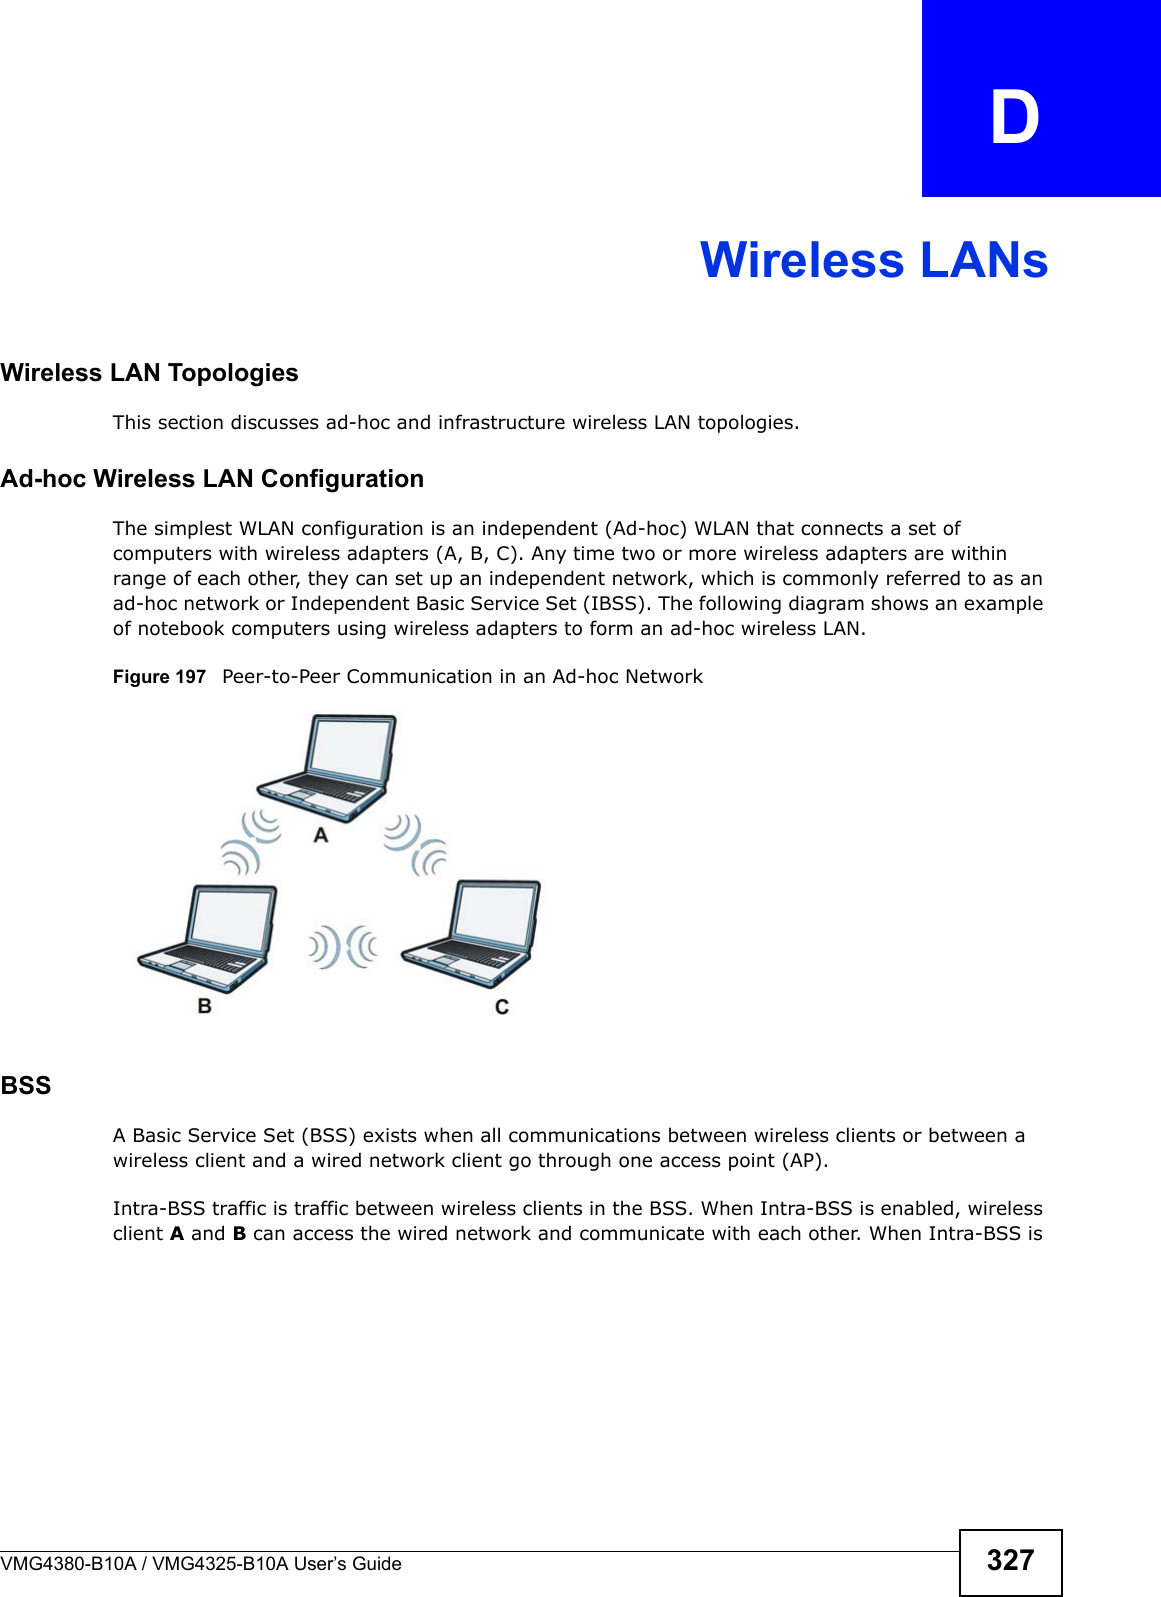 VMG4380-B10A / VMG4325-B10A User’s Guide 327APPENDIX  DWireless LANsWireless LAN TopologiesThis section discusses ad-hoc and infrastructure wireless LAN topologies.Ad-hoc Wireless LAN ConfigurationThe simplest WLAN configuration is an independent (Ad-hoc) WLAN that connects a set of computers with wireless adapters (A, B, C). Any time two or more wireless adapters are within range of each other, they can set up an independent network, which is commonly referred to as an ad-hoc network or Independent Basic Service Set (IBSS). The following diagram shows an example of notebook computers using wireless adapters to form an ad-hoc wireless LAN. Figure 197   Peer-to-Peer Communication in an Ad-hoc NetworkBSSA Basic Service Set (BSS) exists when all communications between wireless clients or between a wireless client and a wired network client go through one access point (AP). Intra-BSS traffic is traffic between wireless clients in the BSS. When Intra-BSS is enabled, wireless client A and B can access the wired network and communicate with each other. When Intra-BSS is 